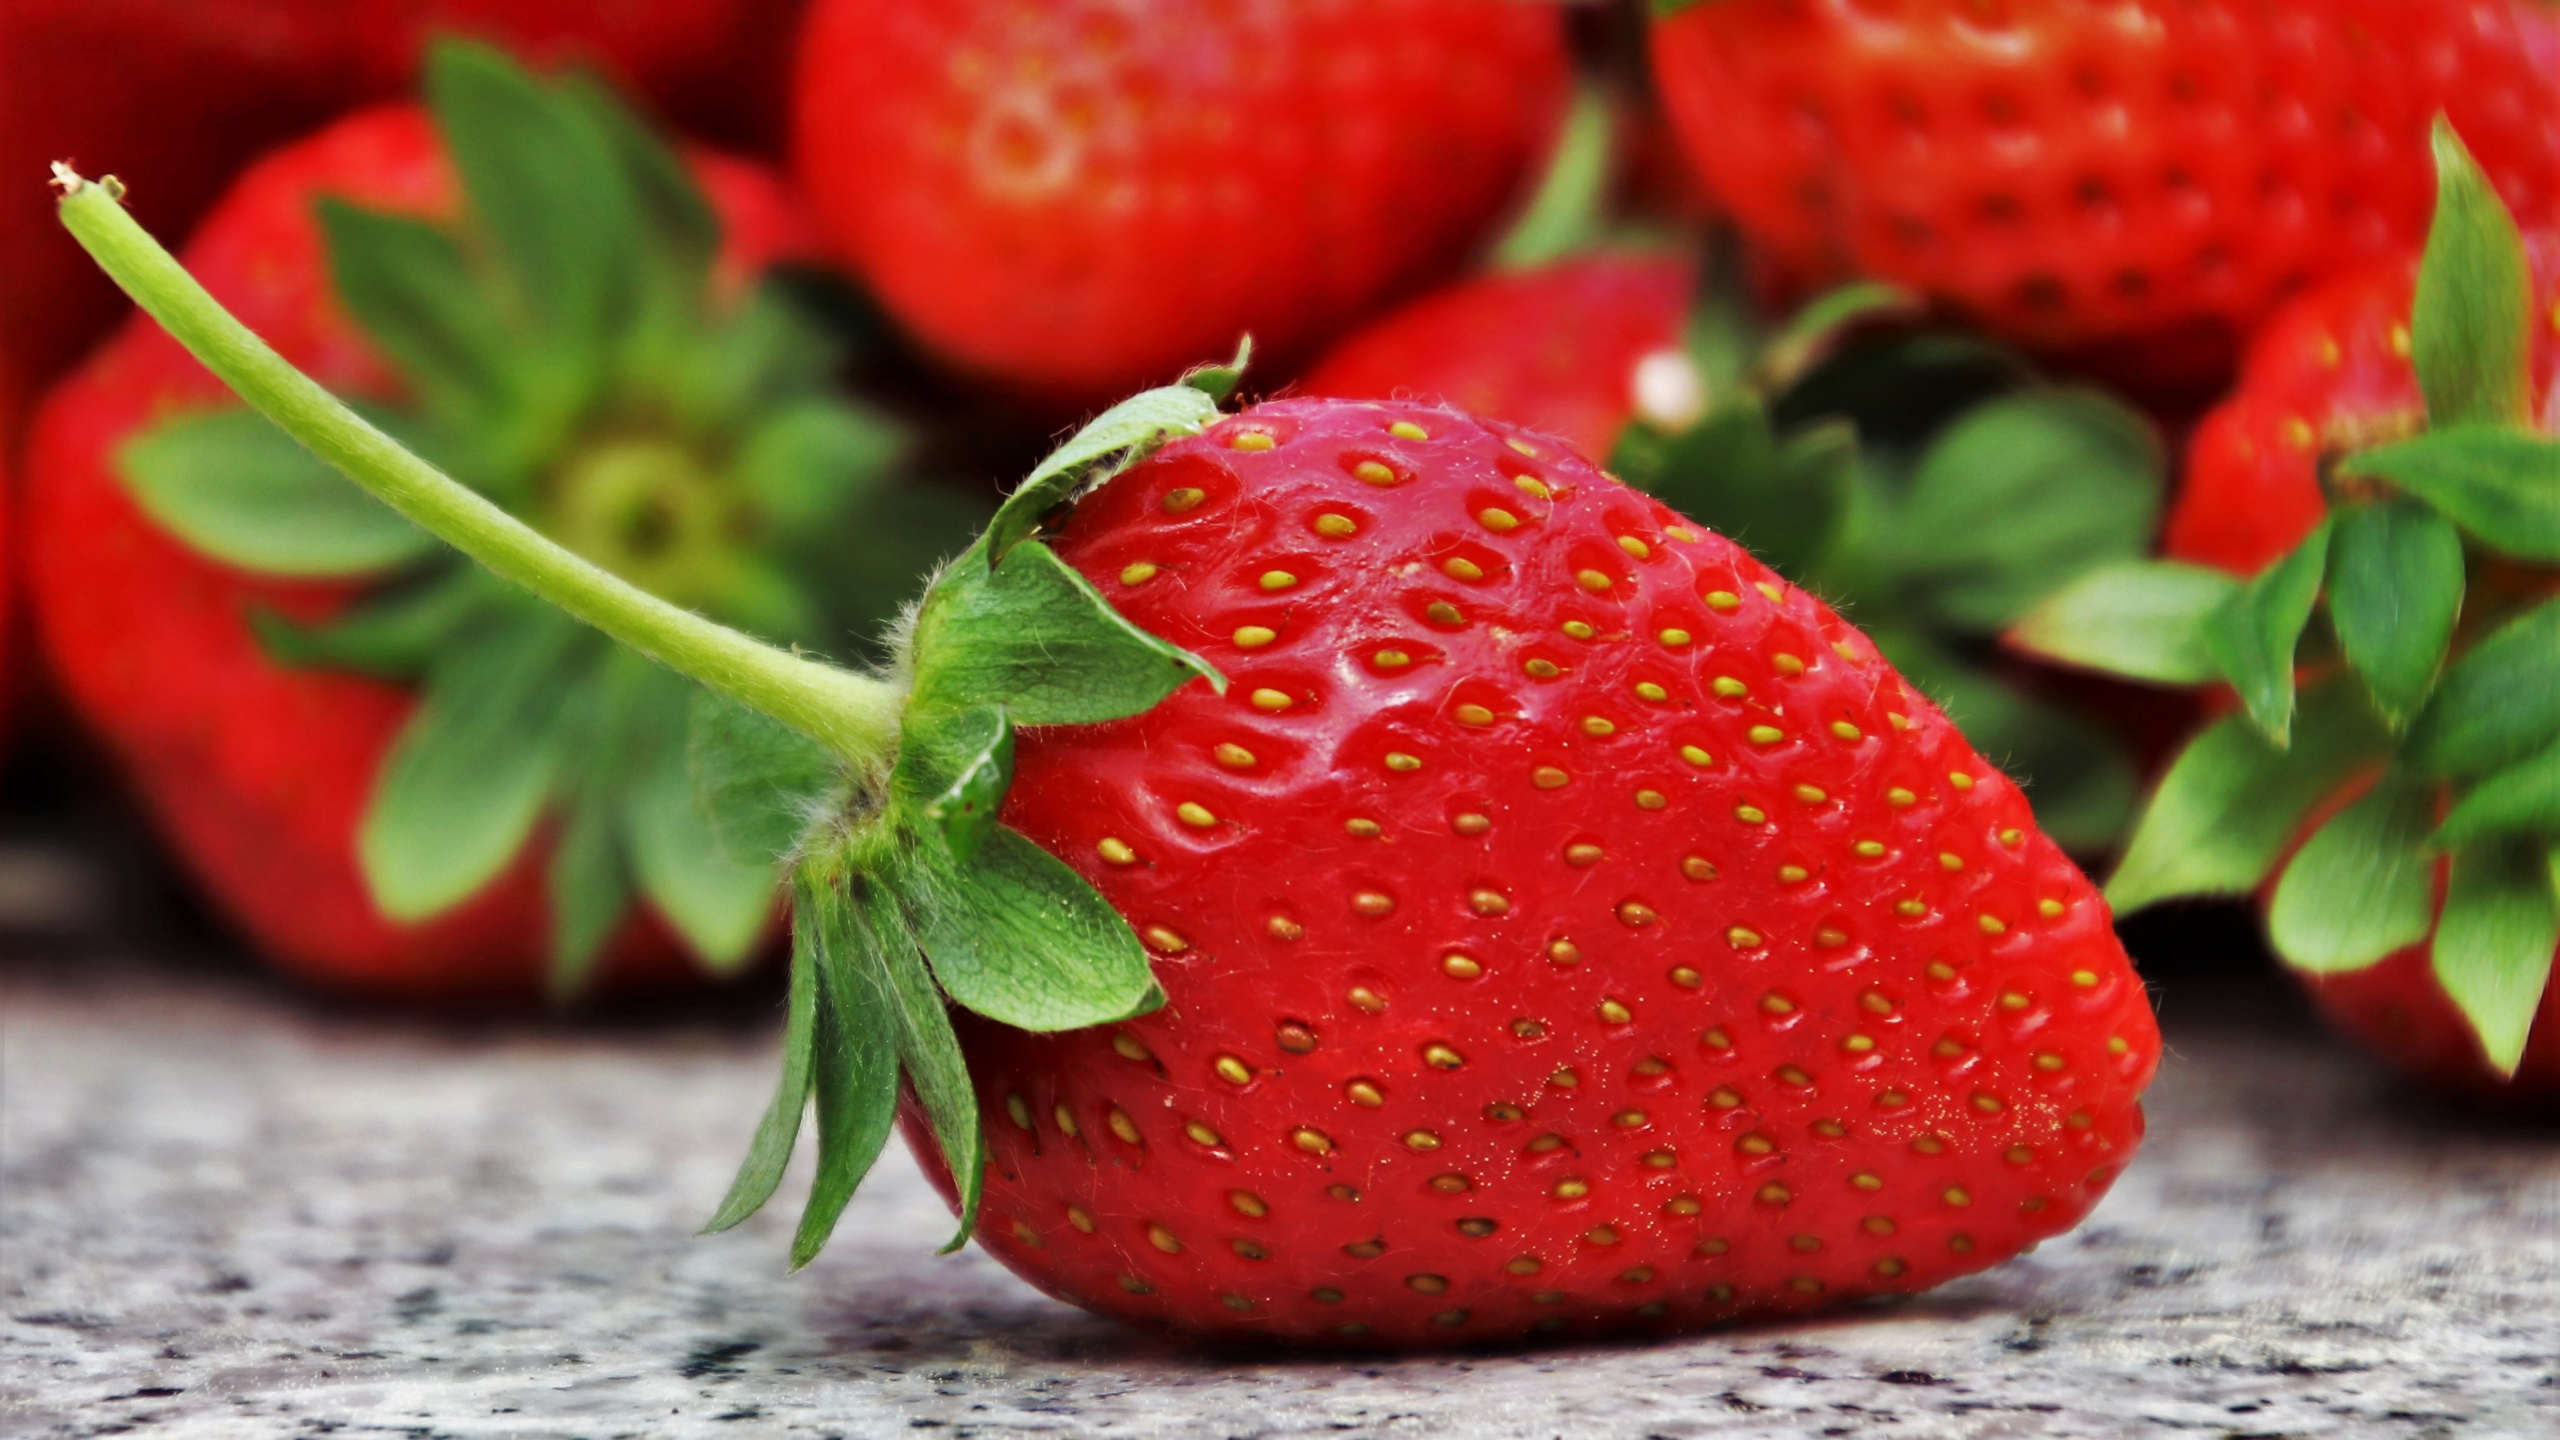 Red Strawberries on White Textile. Wallpaper in 2560x1440 Resolution